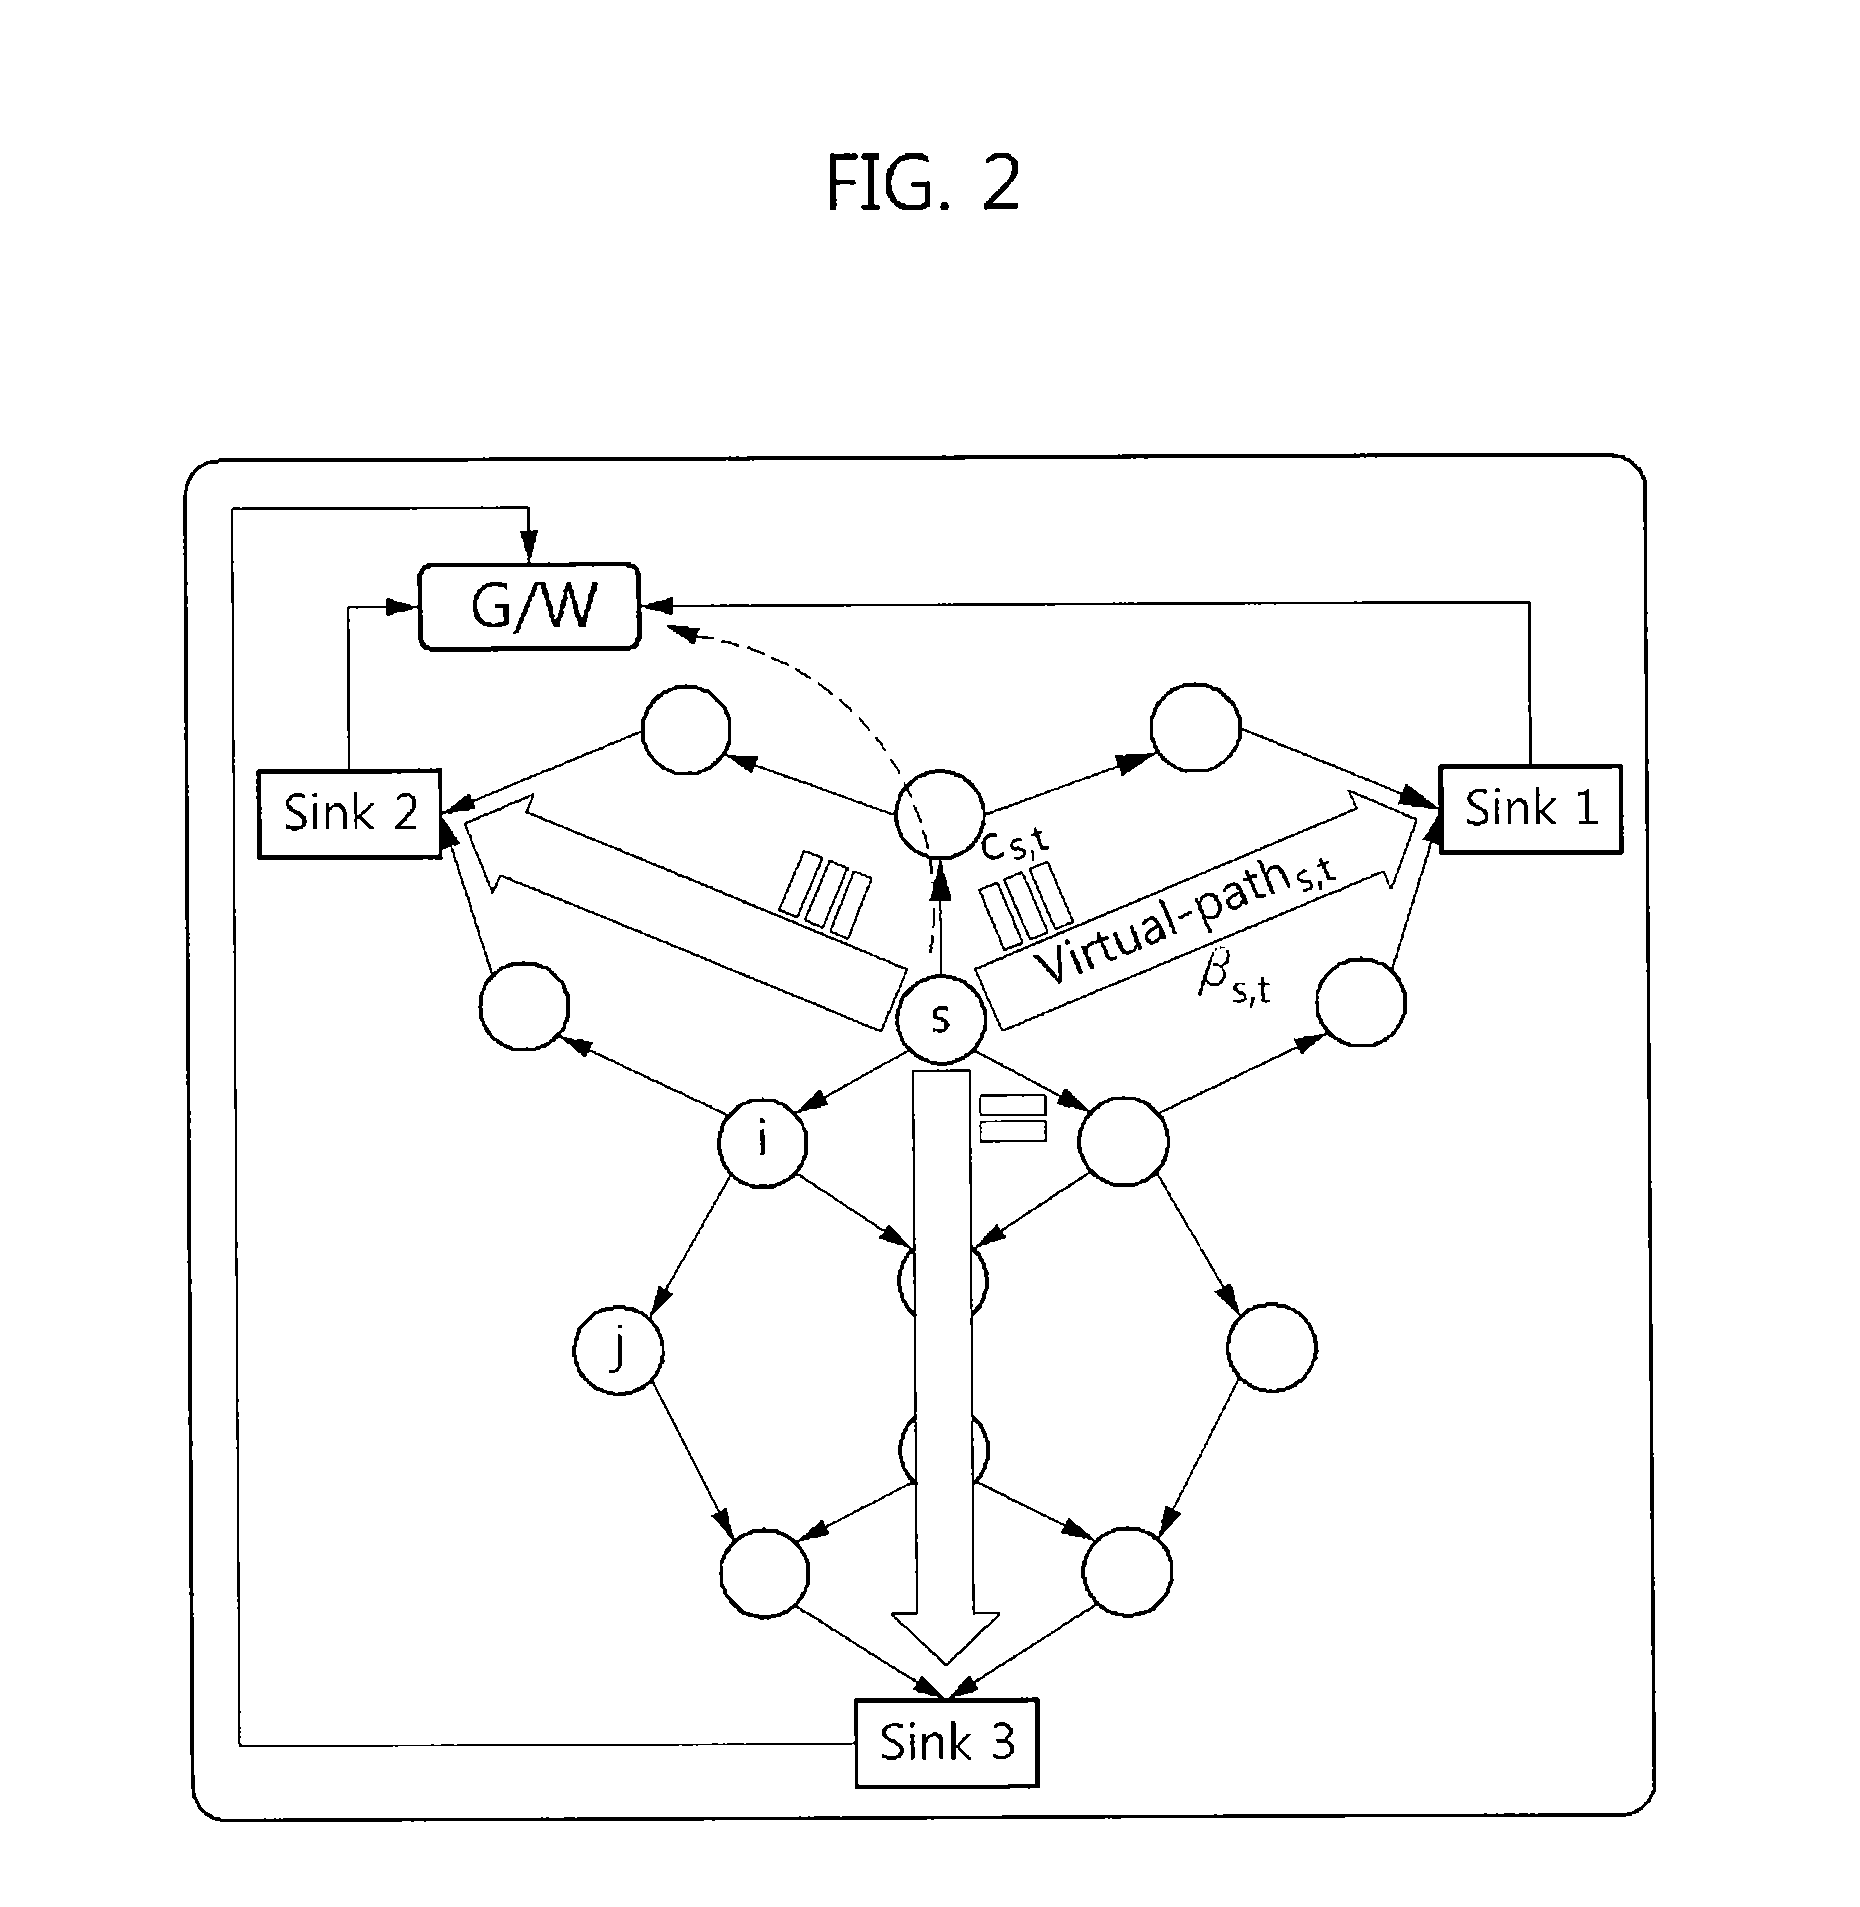 Method for controlling multi-sink/multi-path routing sensor network and sensor network using the same